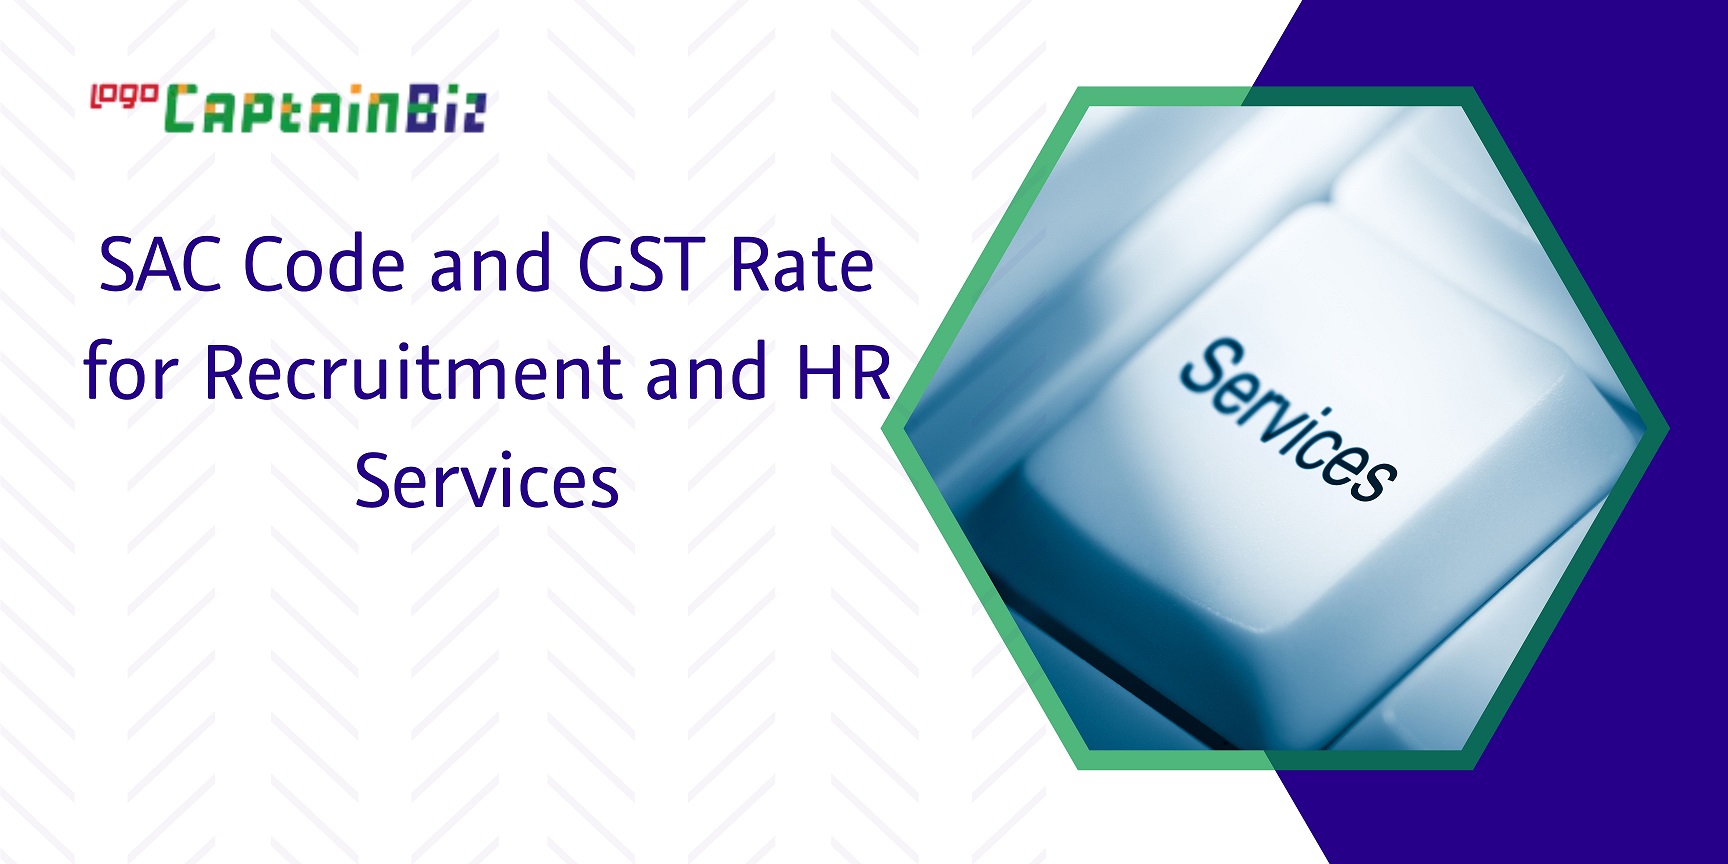 CaptainBiz: sac code and gst rate for recruitment and hr services